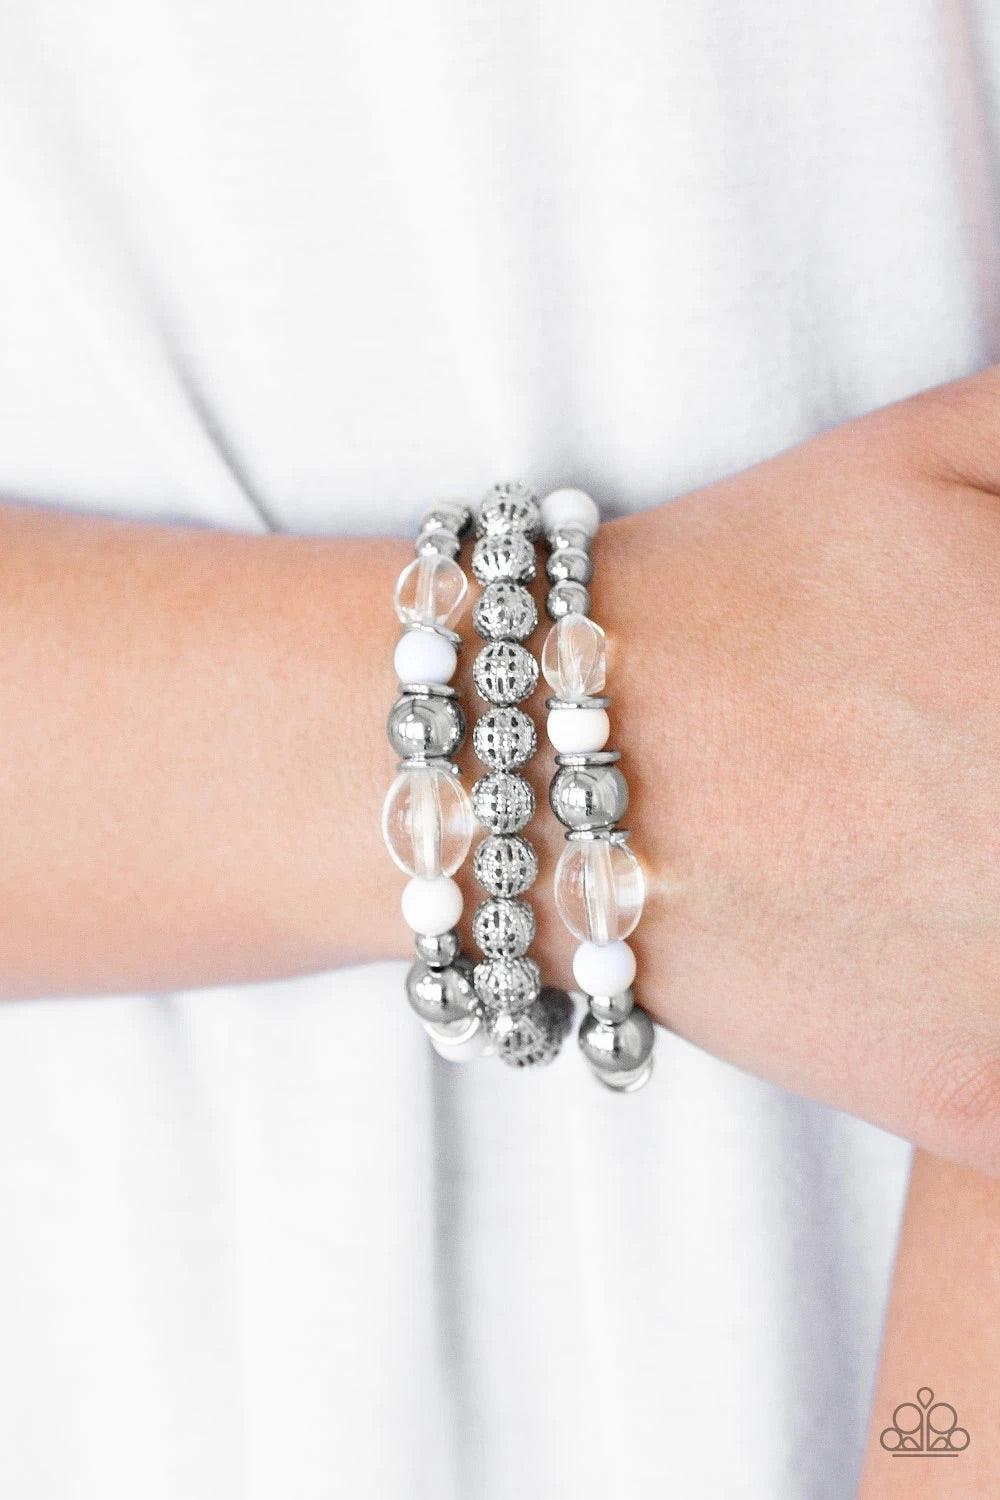 Paparazzi Accessories Malibu Marina - White An array of glassy and polished white beading and mismatched silver accents are threaded along stretchy elastic bands, creating colorful layers across the wrist. Sold as one set of three bracelets. Jewelry